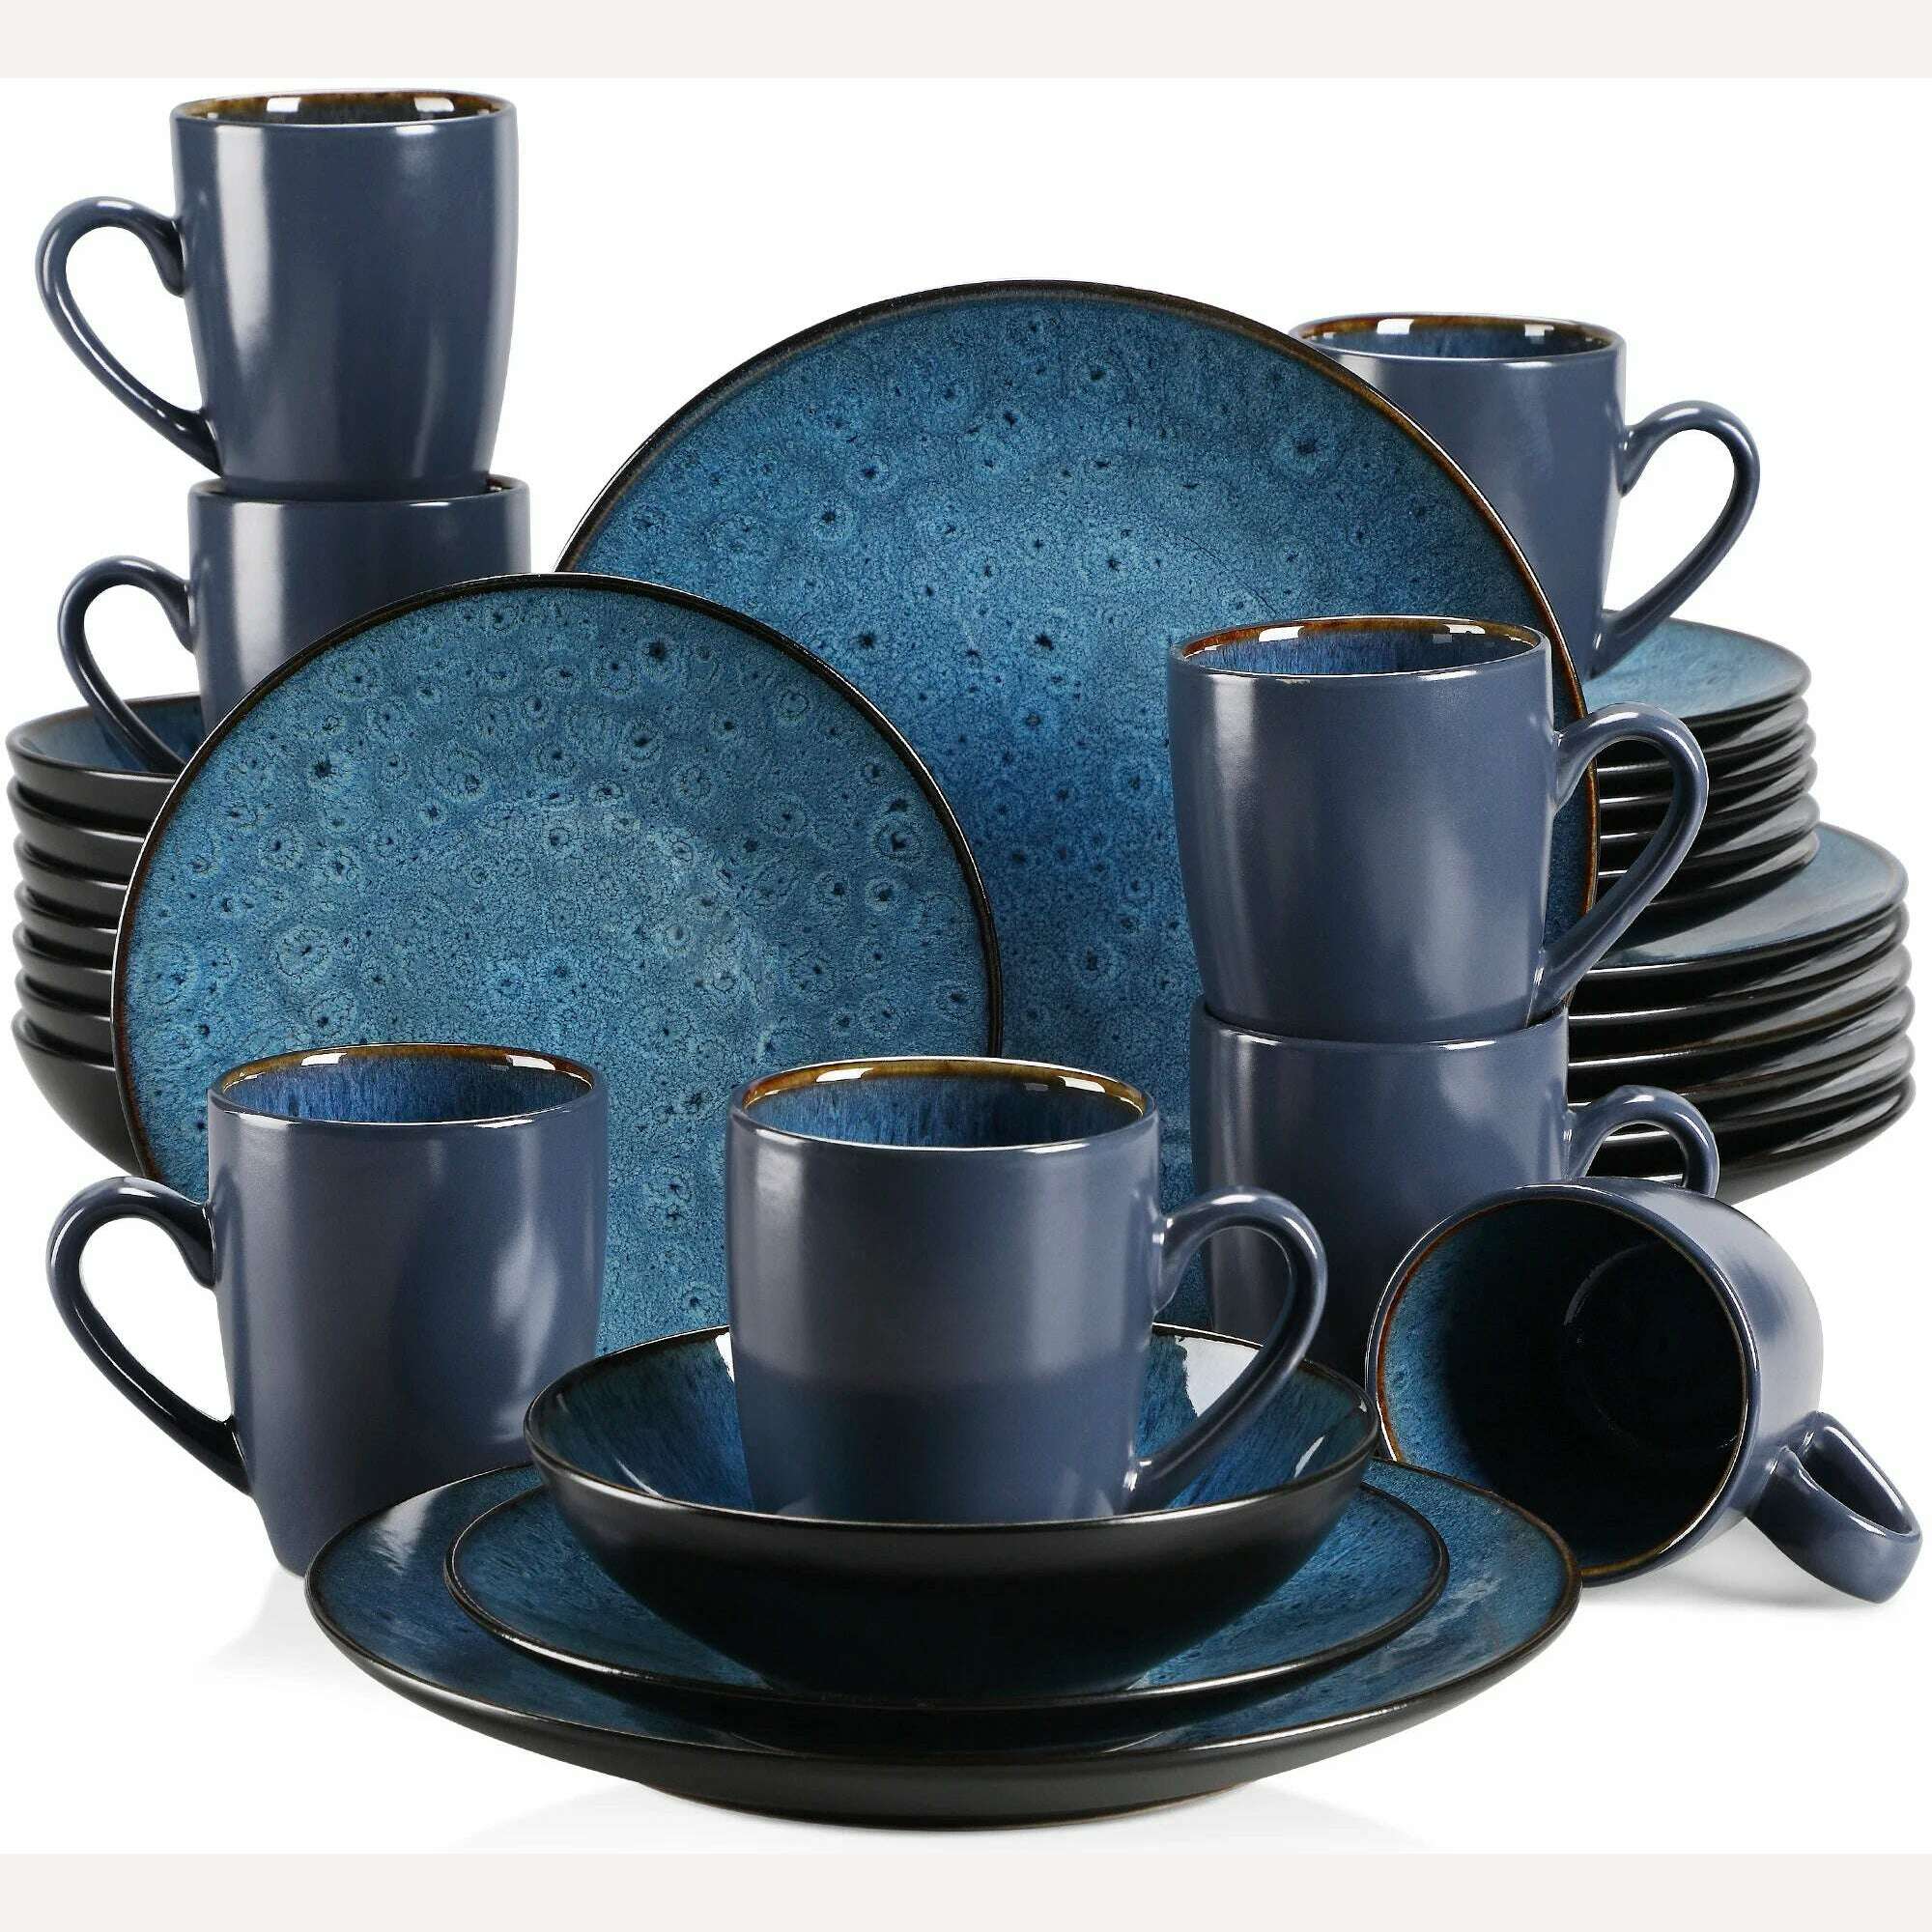 KIMLUD, VANCASSO BUBBLE 16/32/48-Piece Tableware Set Vintage Ceramic Blue/Brown Stoneware Set with Dinner&Dessert Plate,Bowl,Coffee Cups, Blue-32-Piece / GERMANY, KIMLUD Womens Clothes